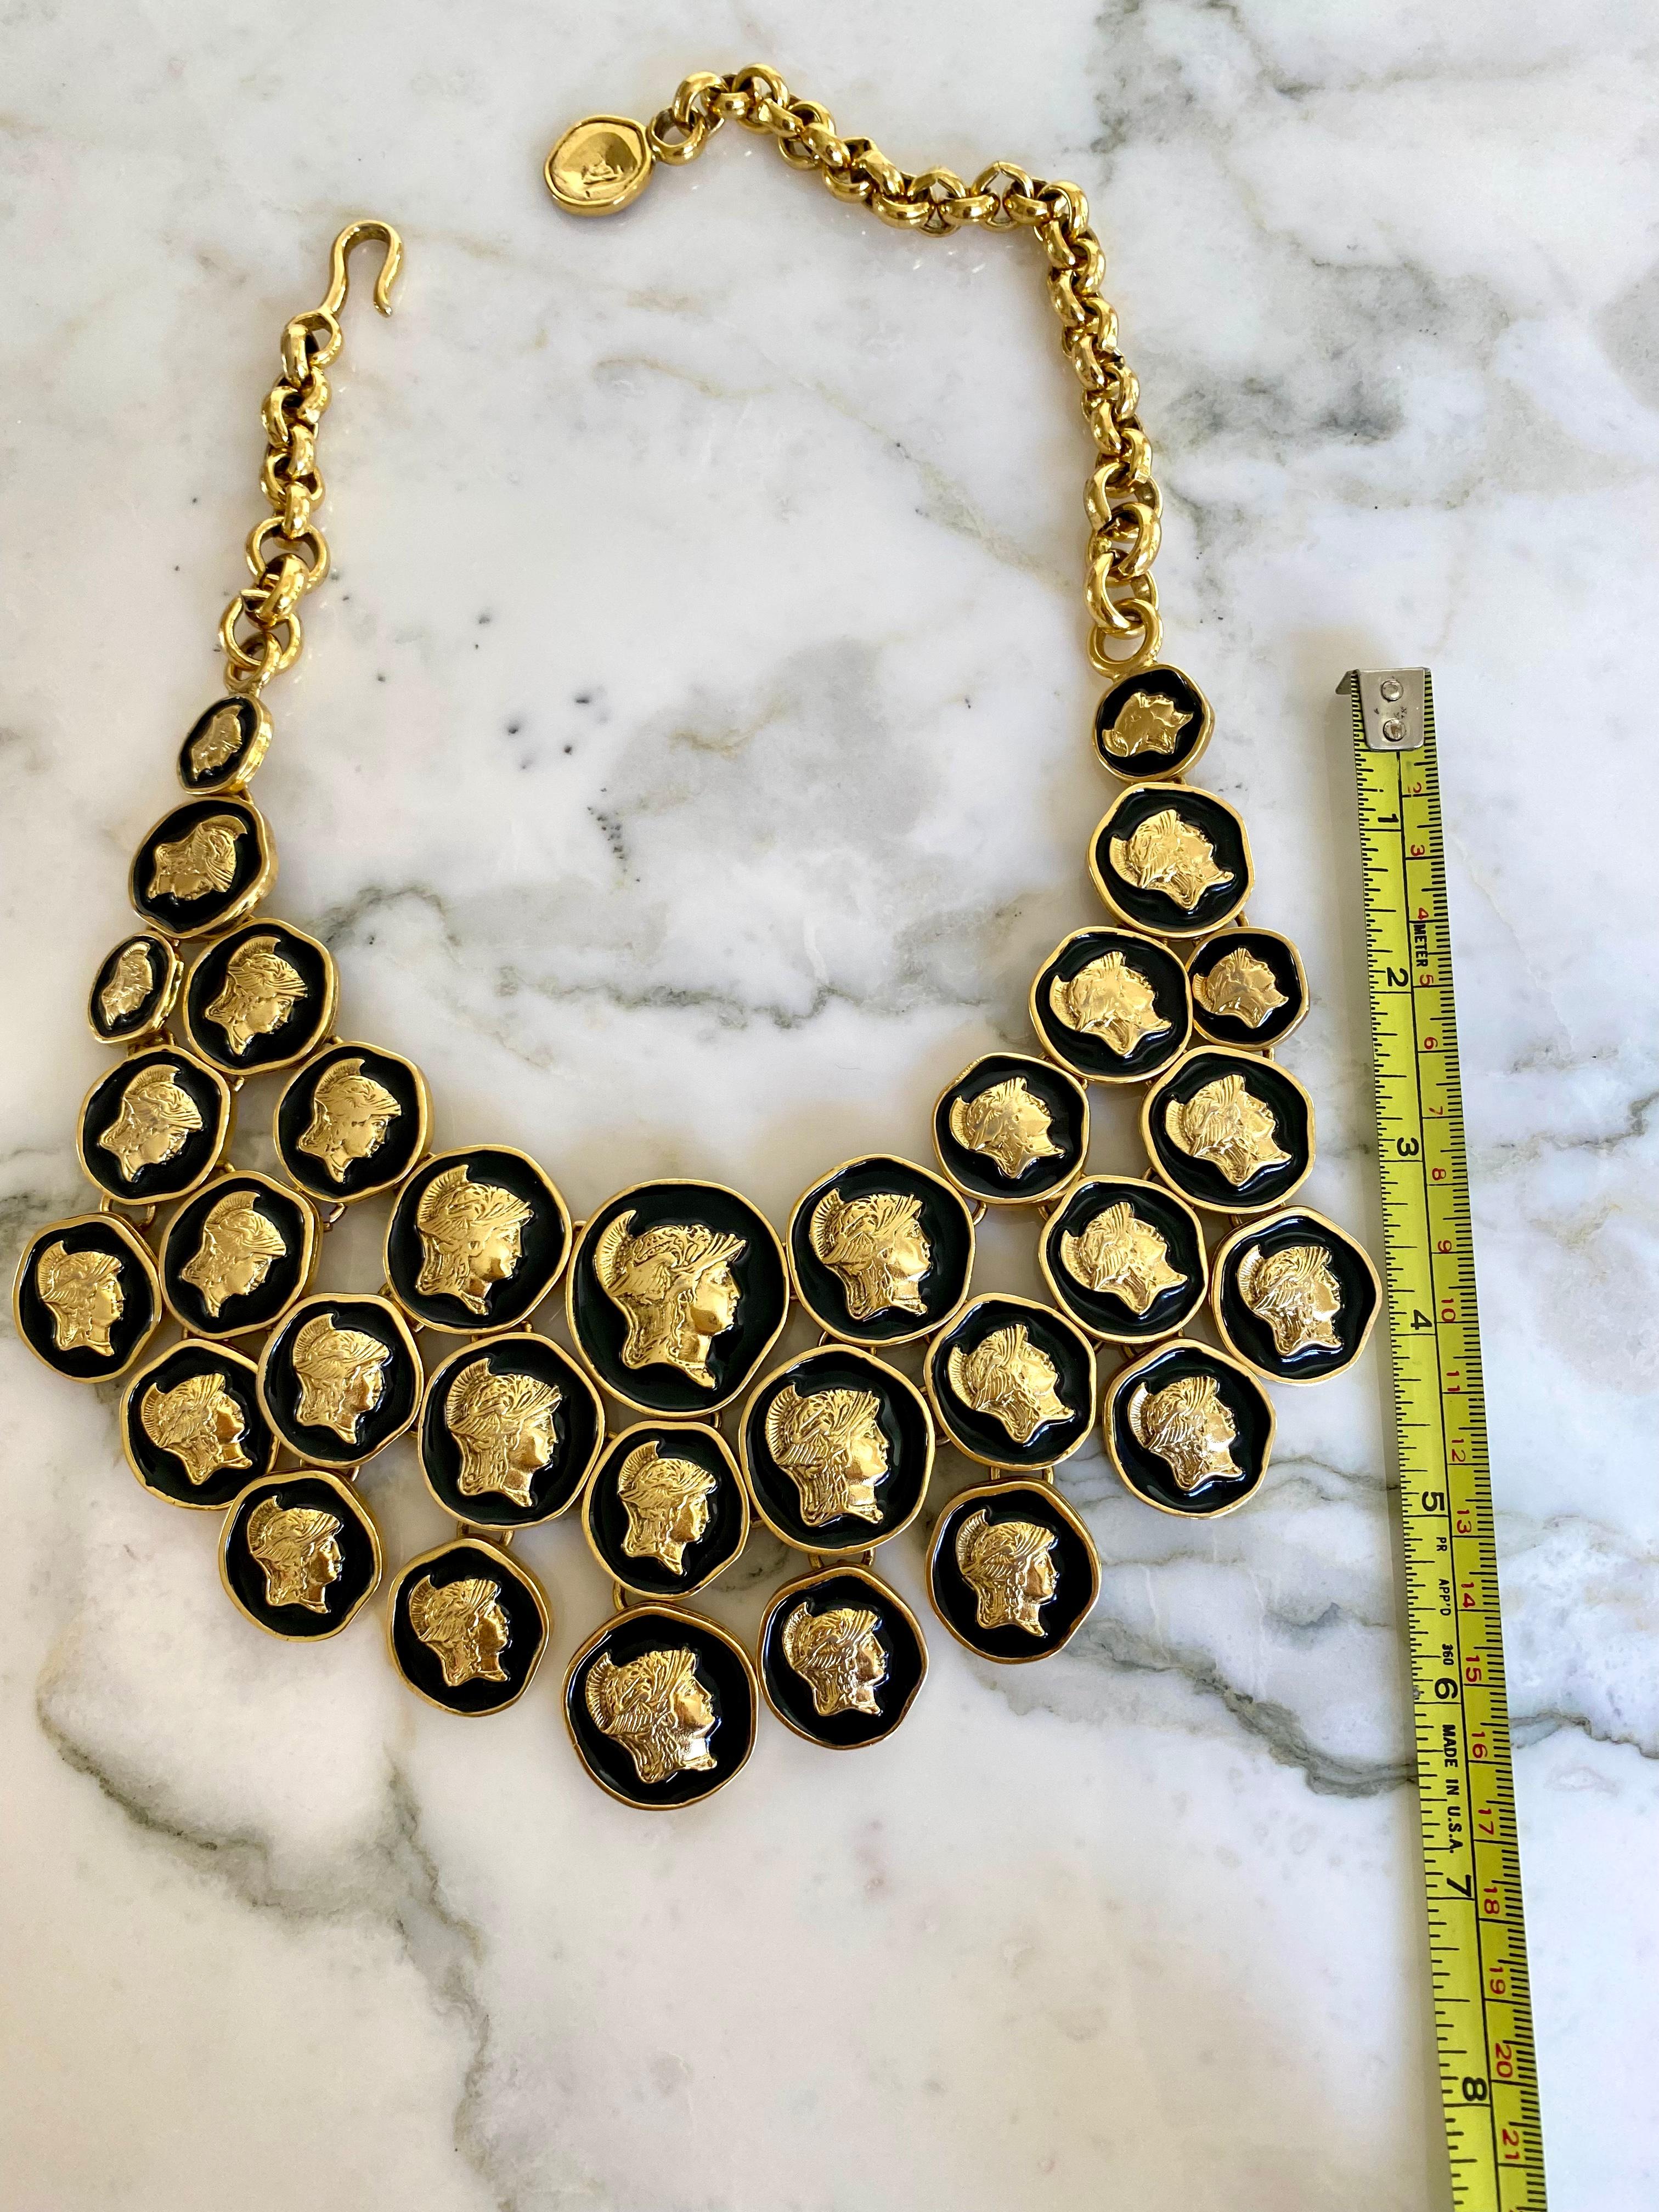 Vintage Ugo Correani Roman  Medallion Gold Pendant Bib Necklace  In Excellent Condition For Sale In Beverly Hills, CA